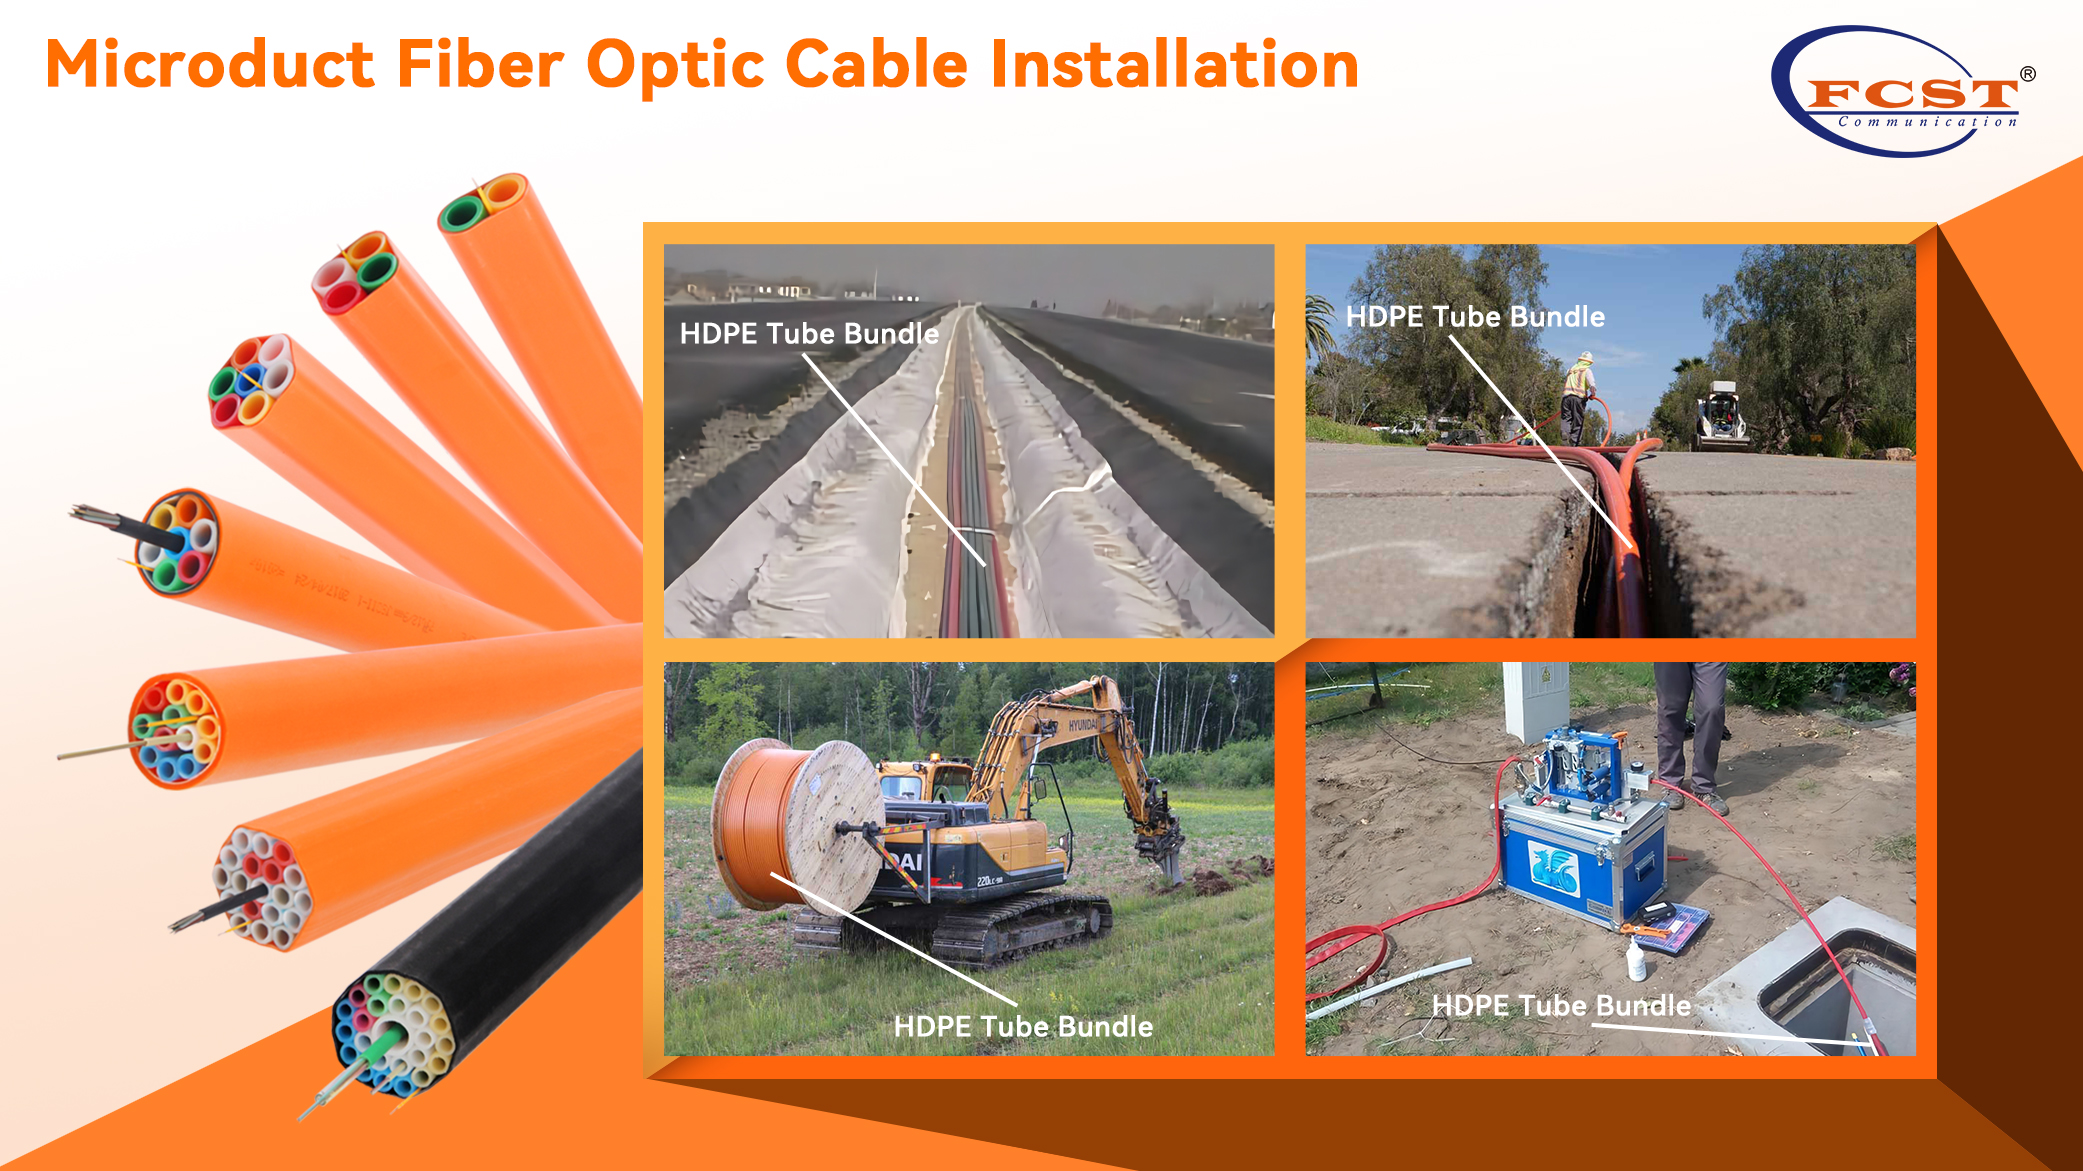 Microduct Fiber Optic Cable Installation